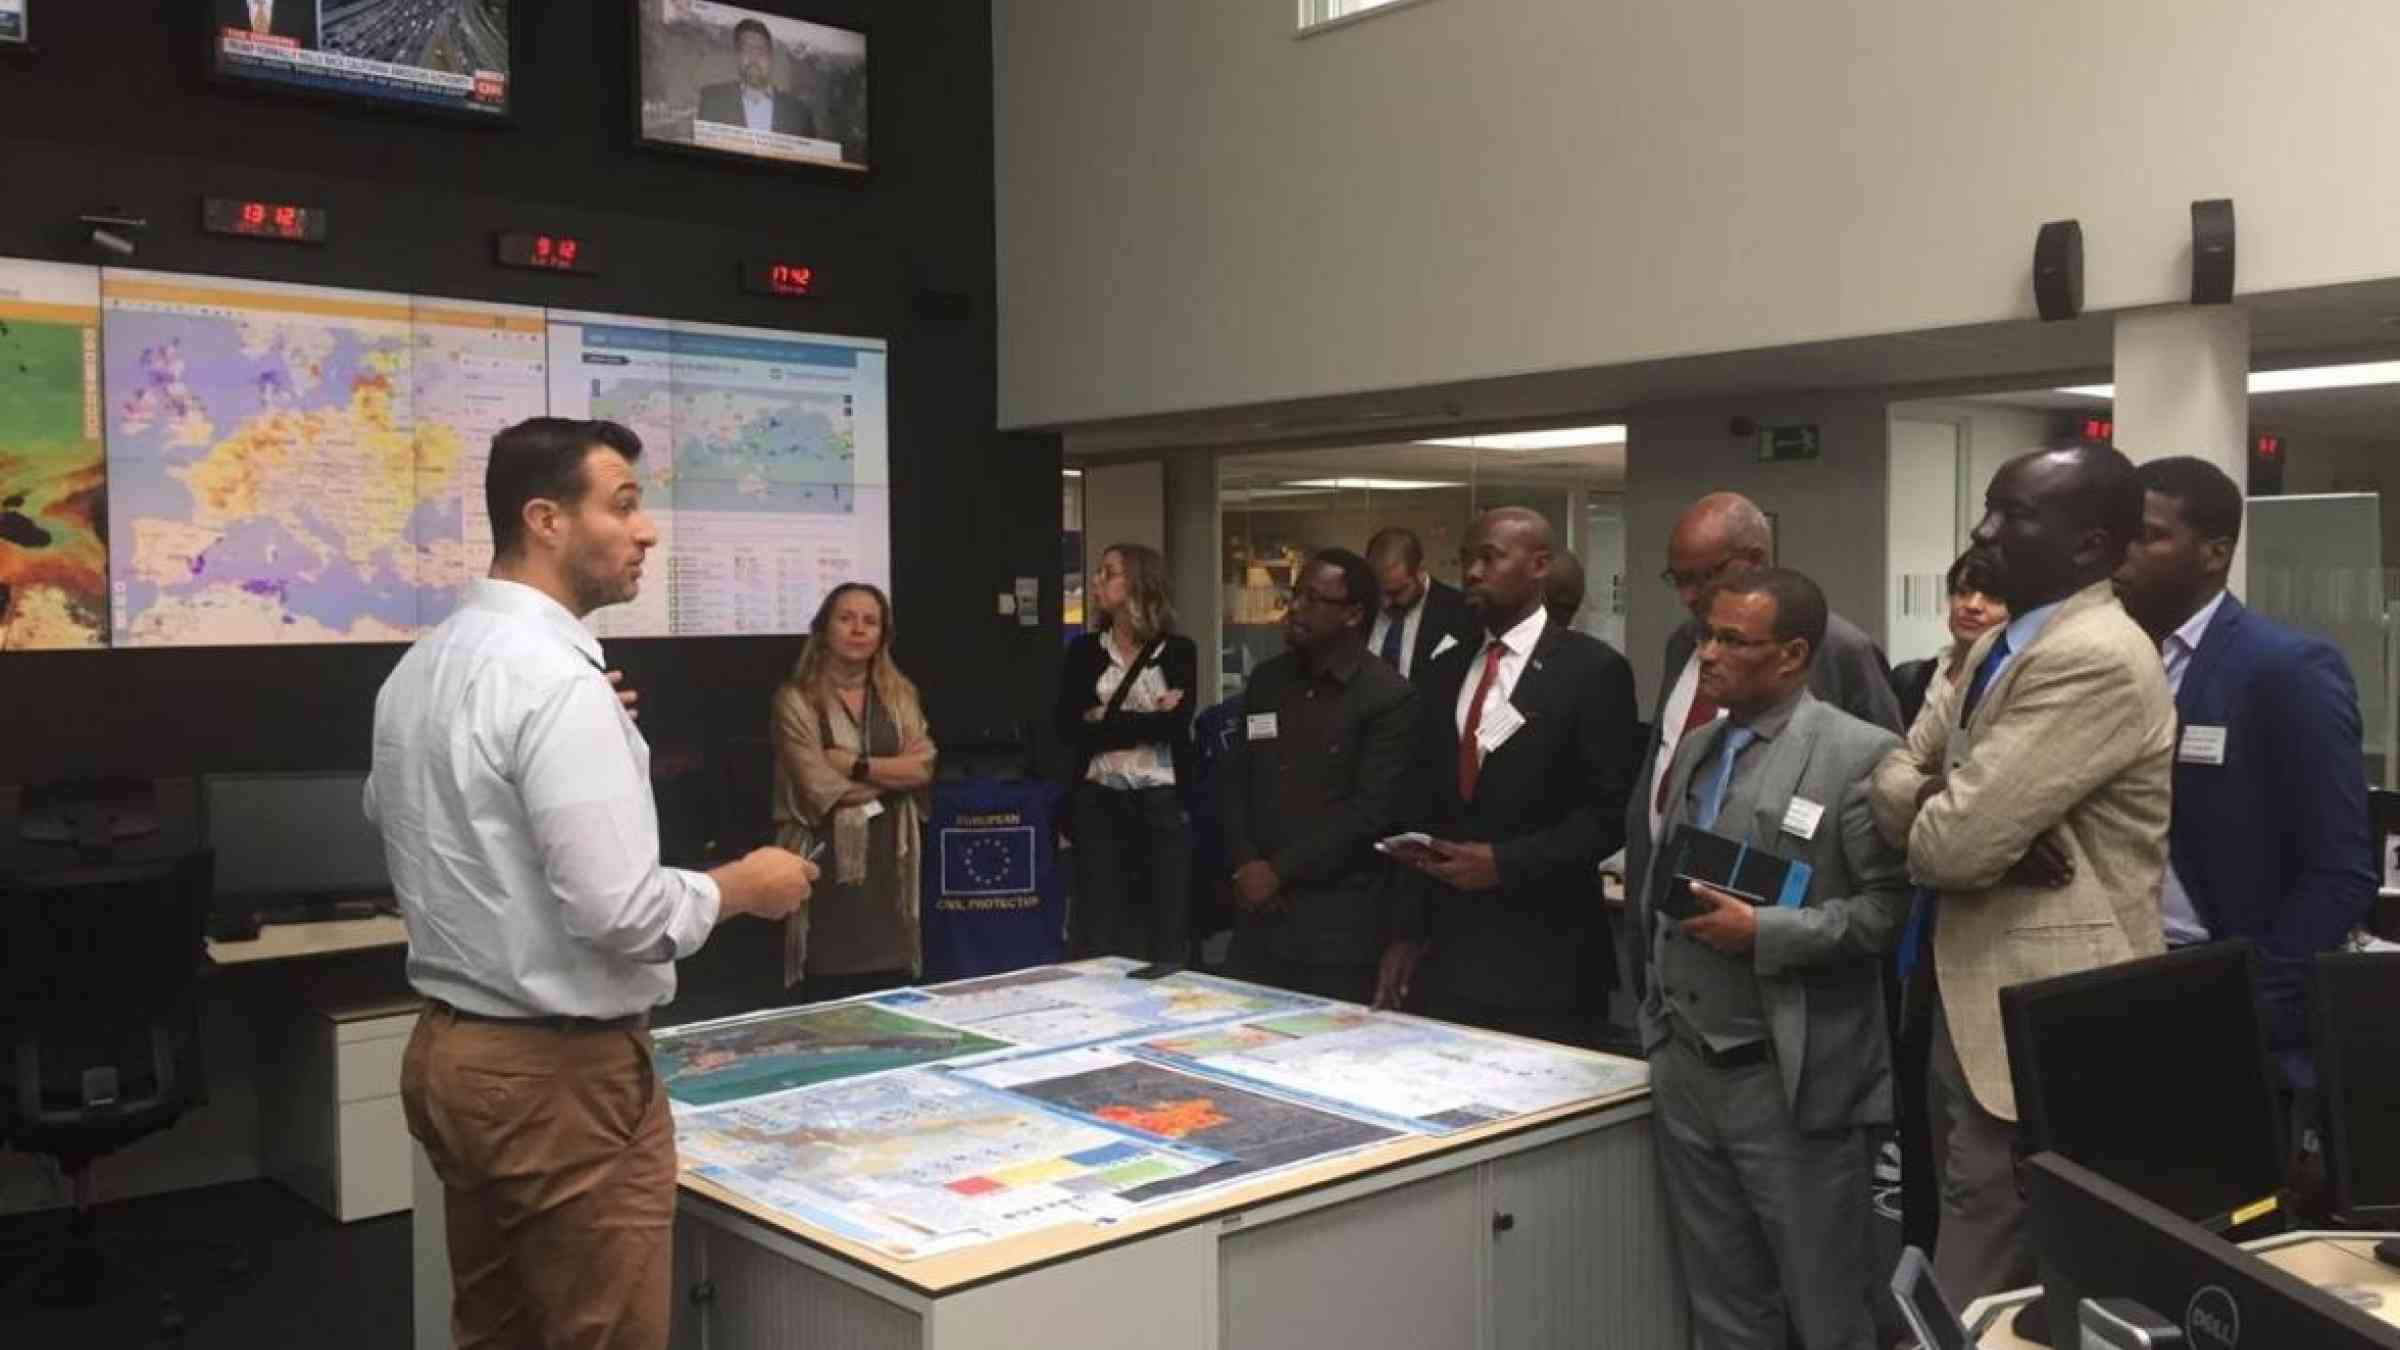 Disaster risk management officials from Africa visited the European Response Coordination Centre this week in Brussels